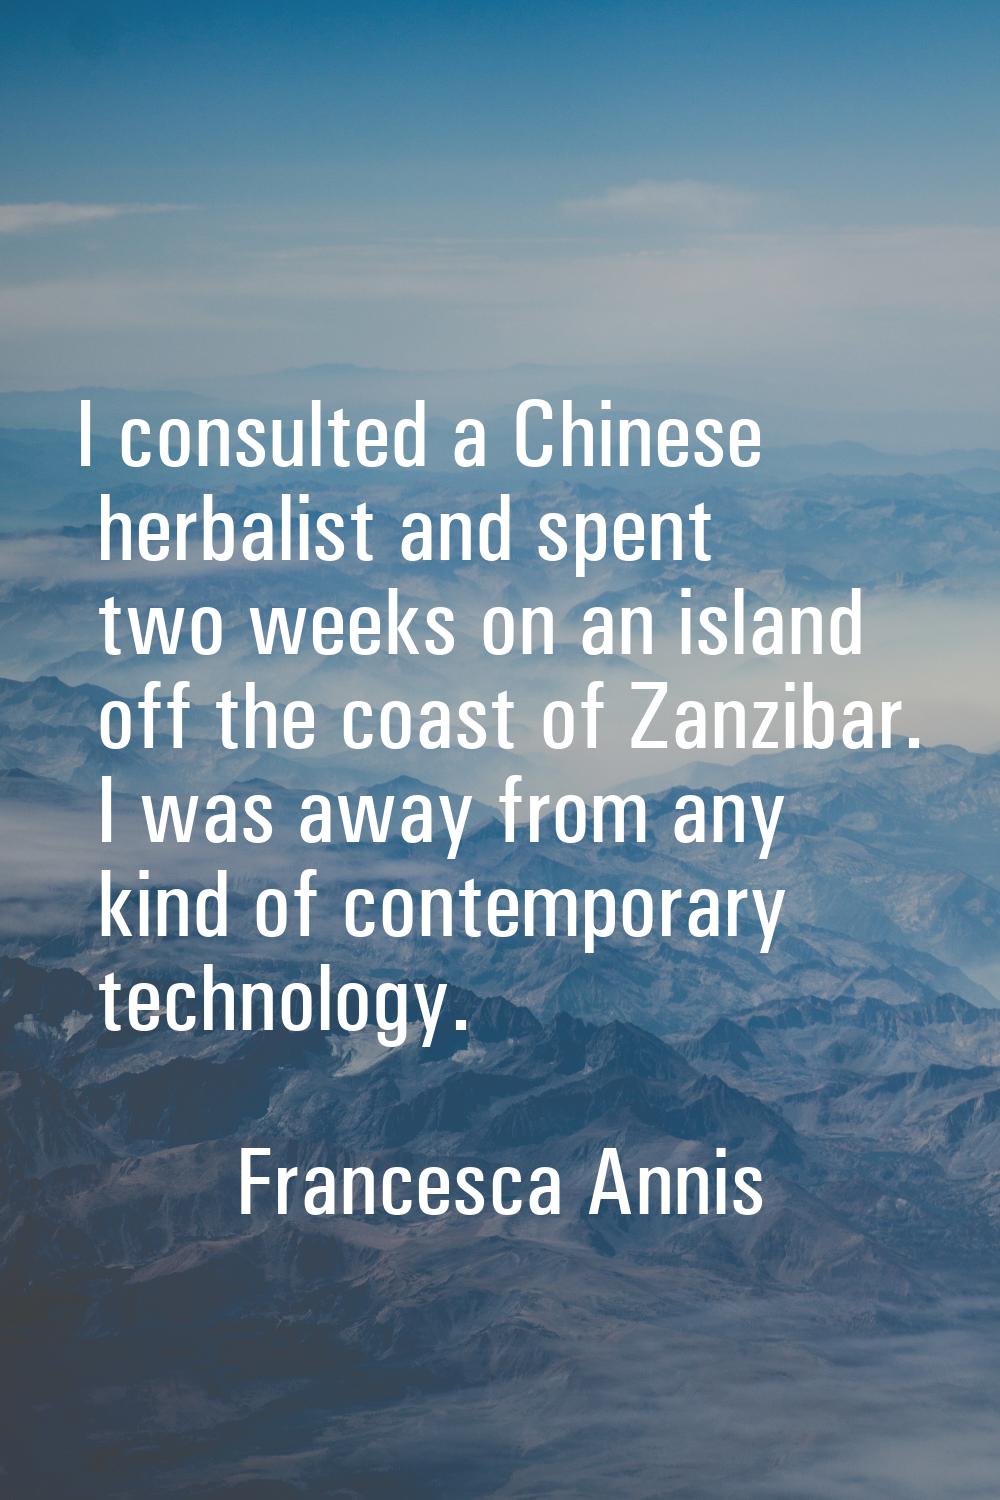 I consulted a Chinese herbalist and spent two weeks on an island off the coast of Zanzibar. I was a